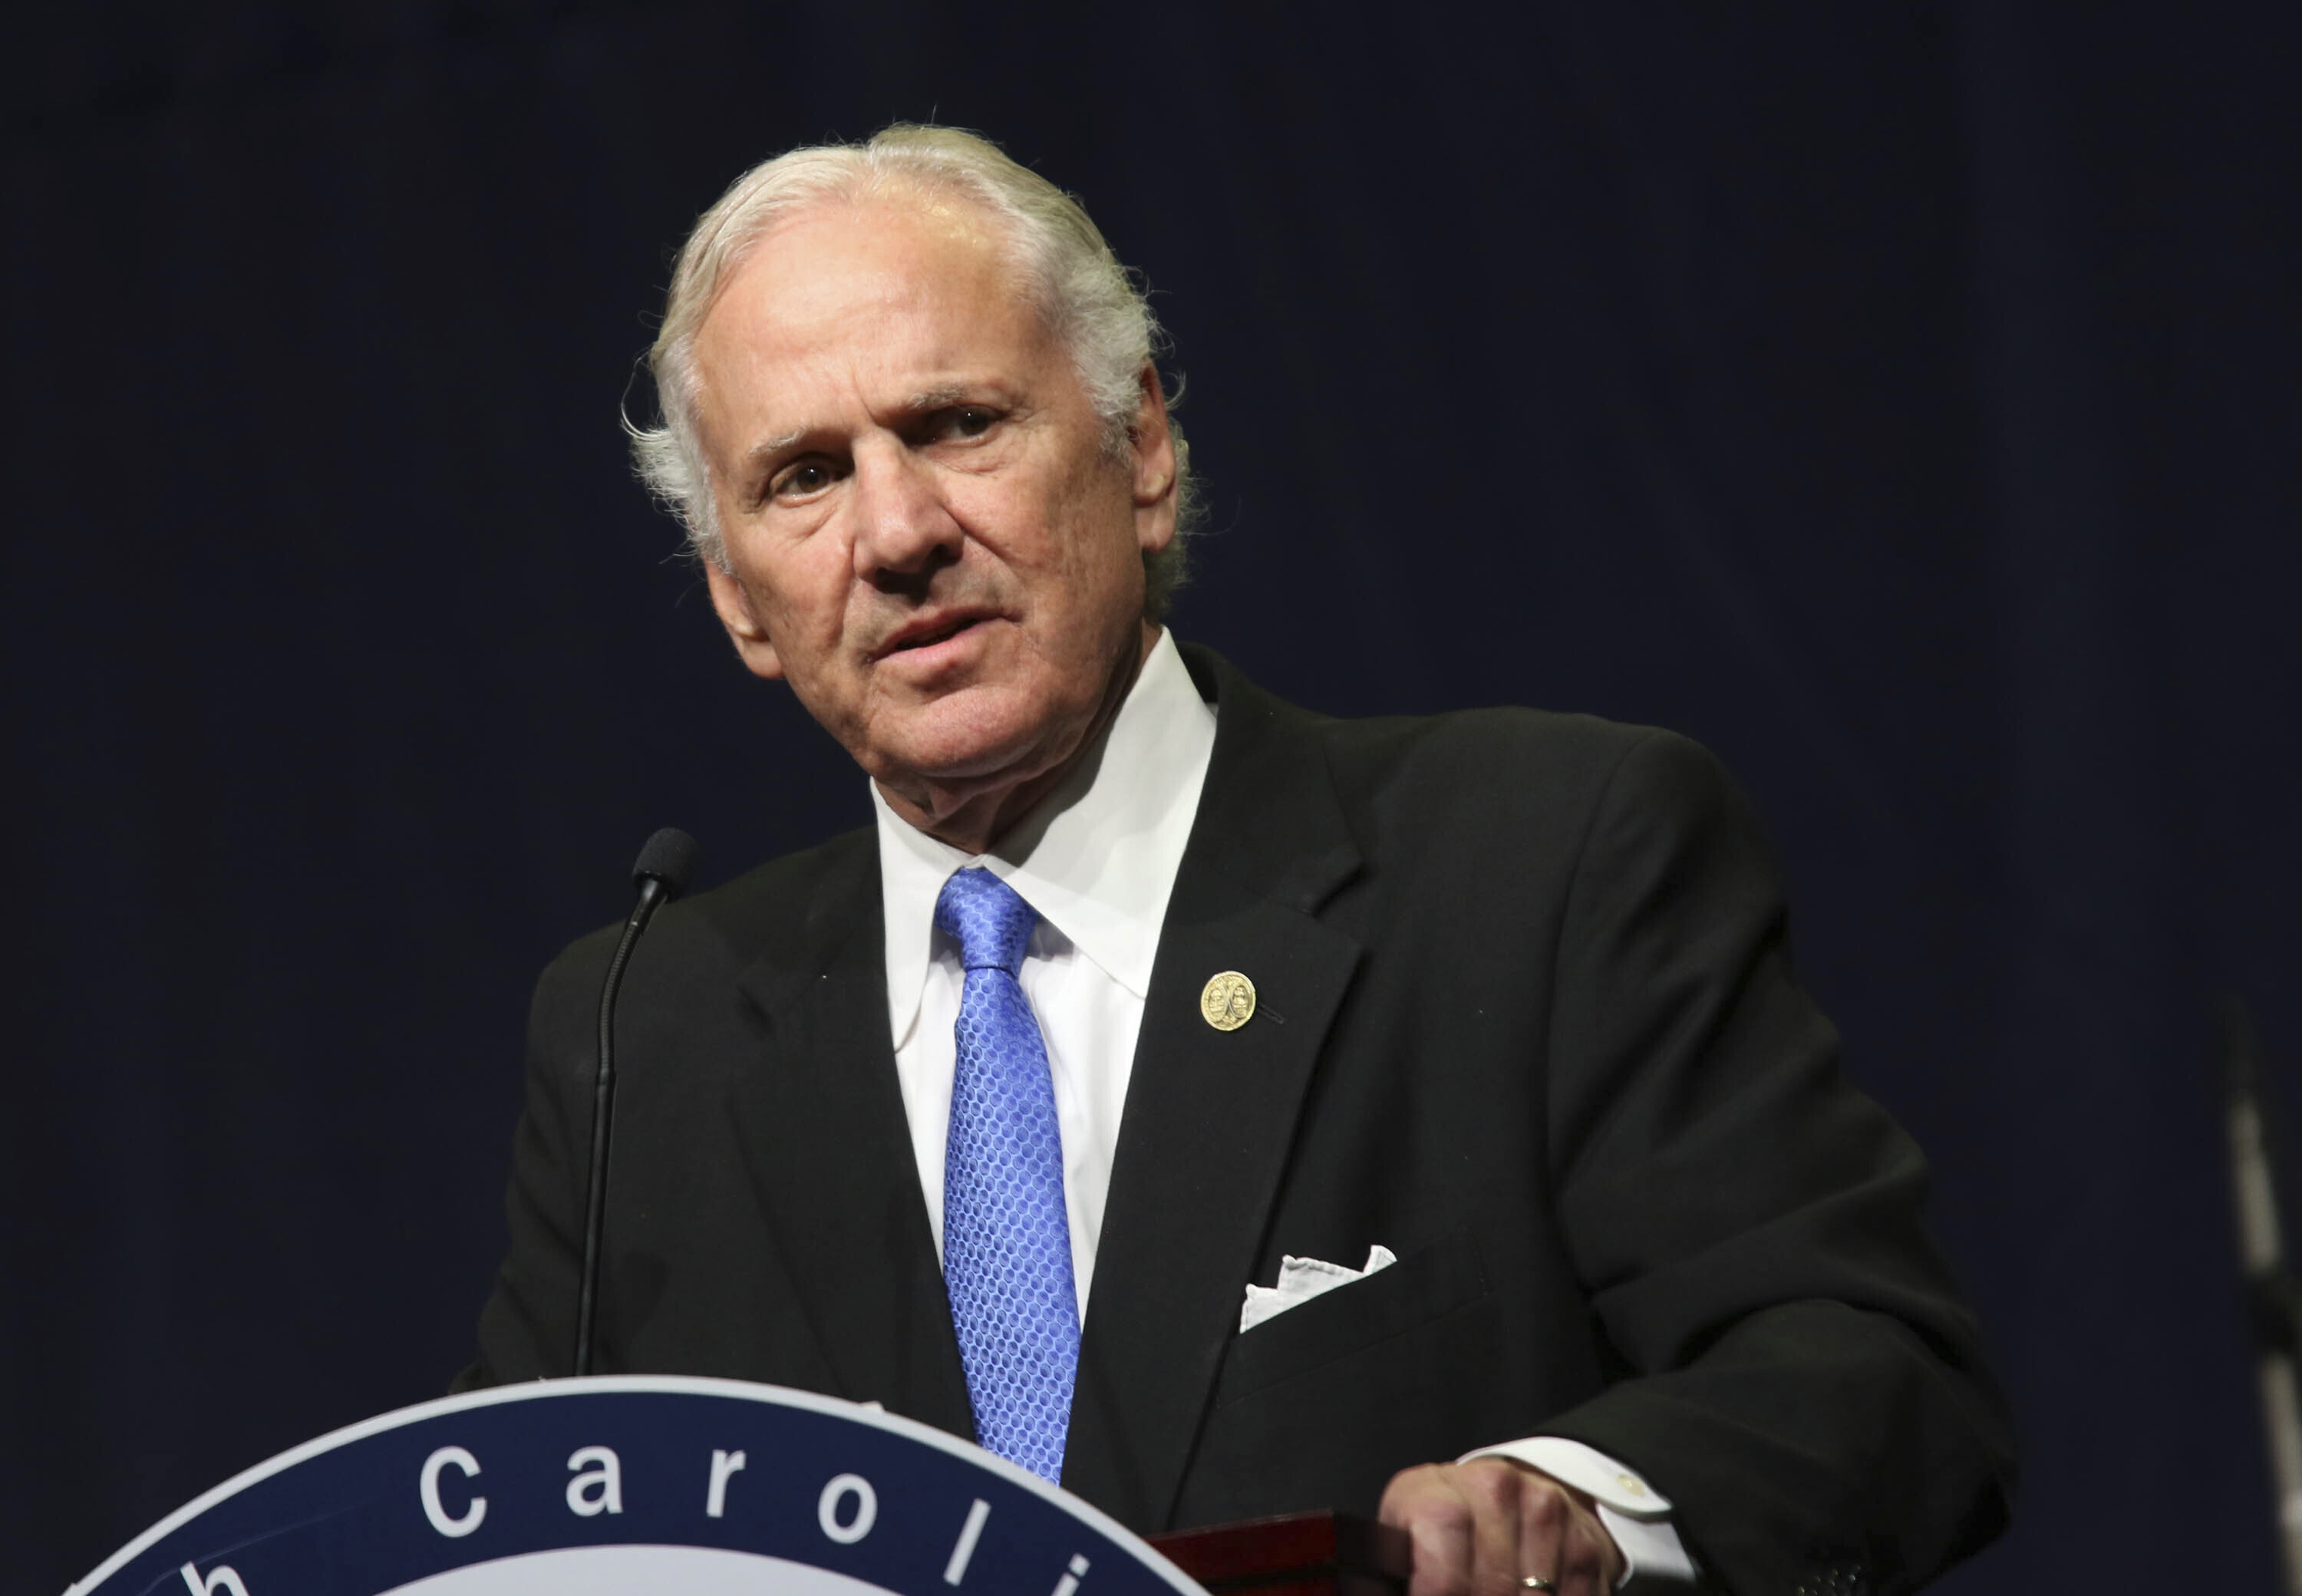 South Carolina Gov. Henry McMaster speaks at an event in Columbia, South Carolina, on July 30.